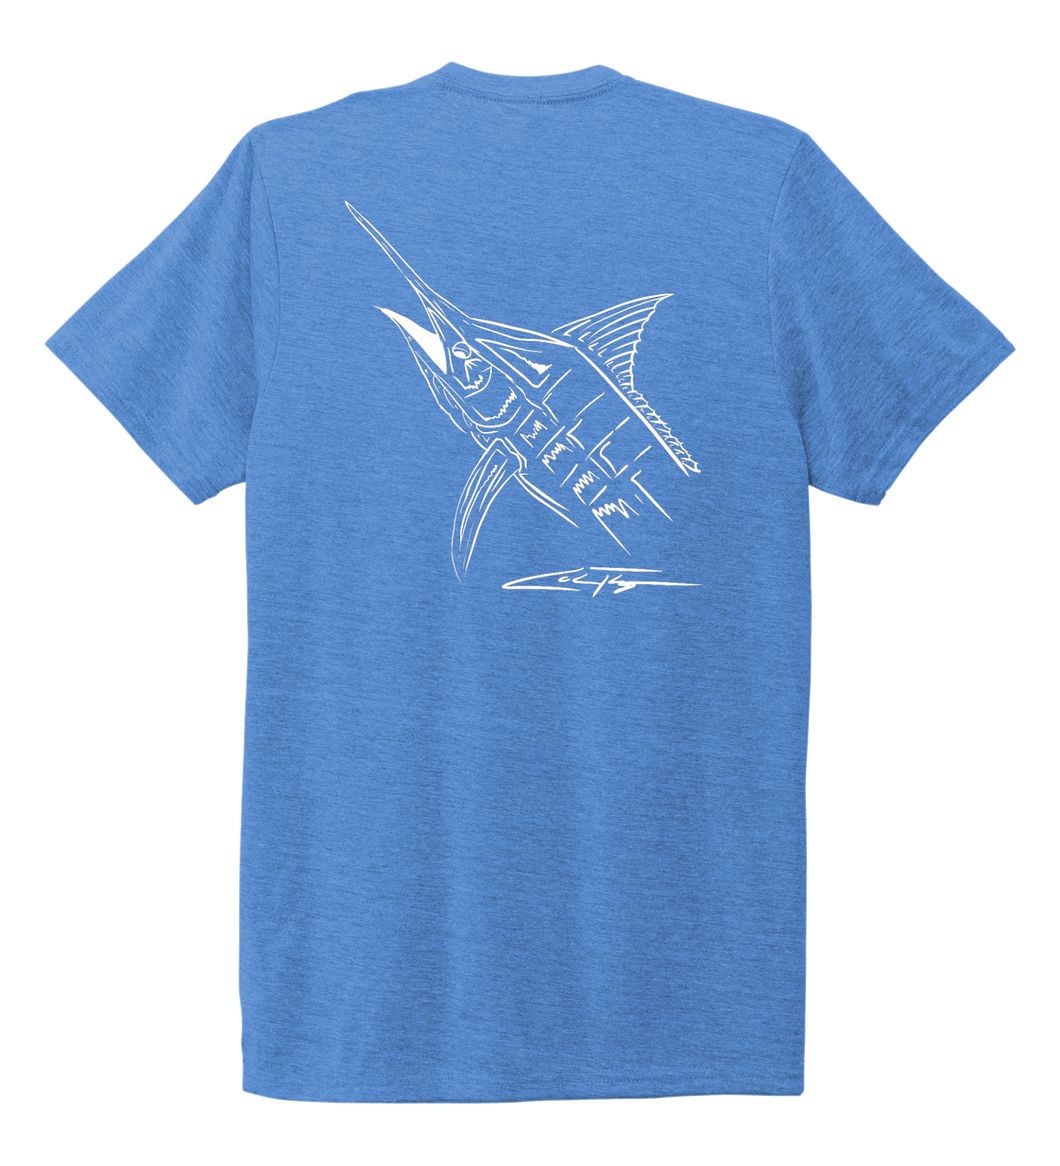 Colin Thompson, Marlin, Crew Neck T-Shirt in Sky Blue